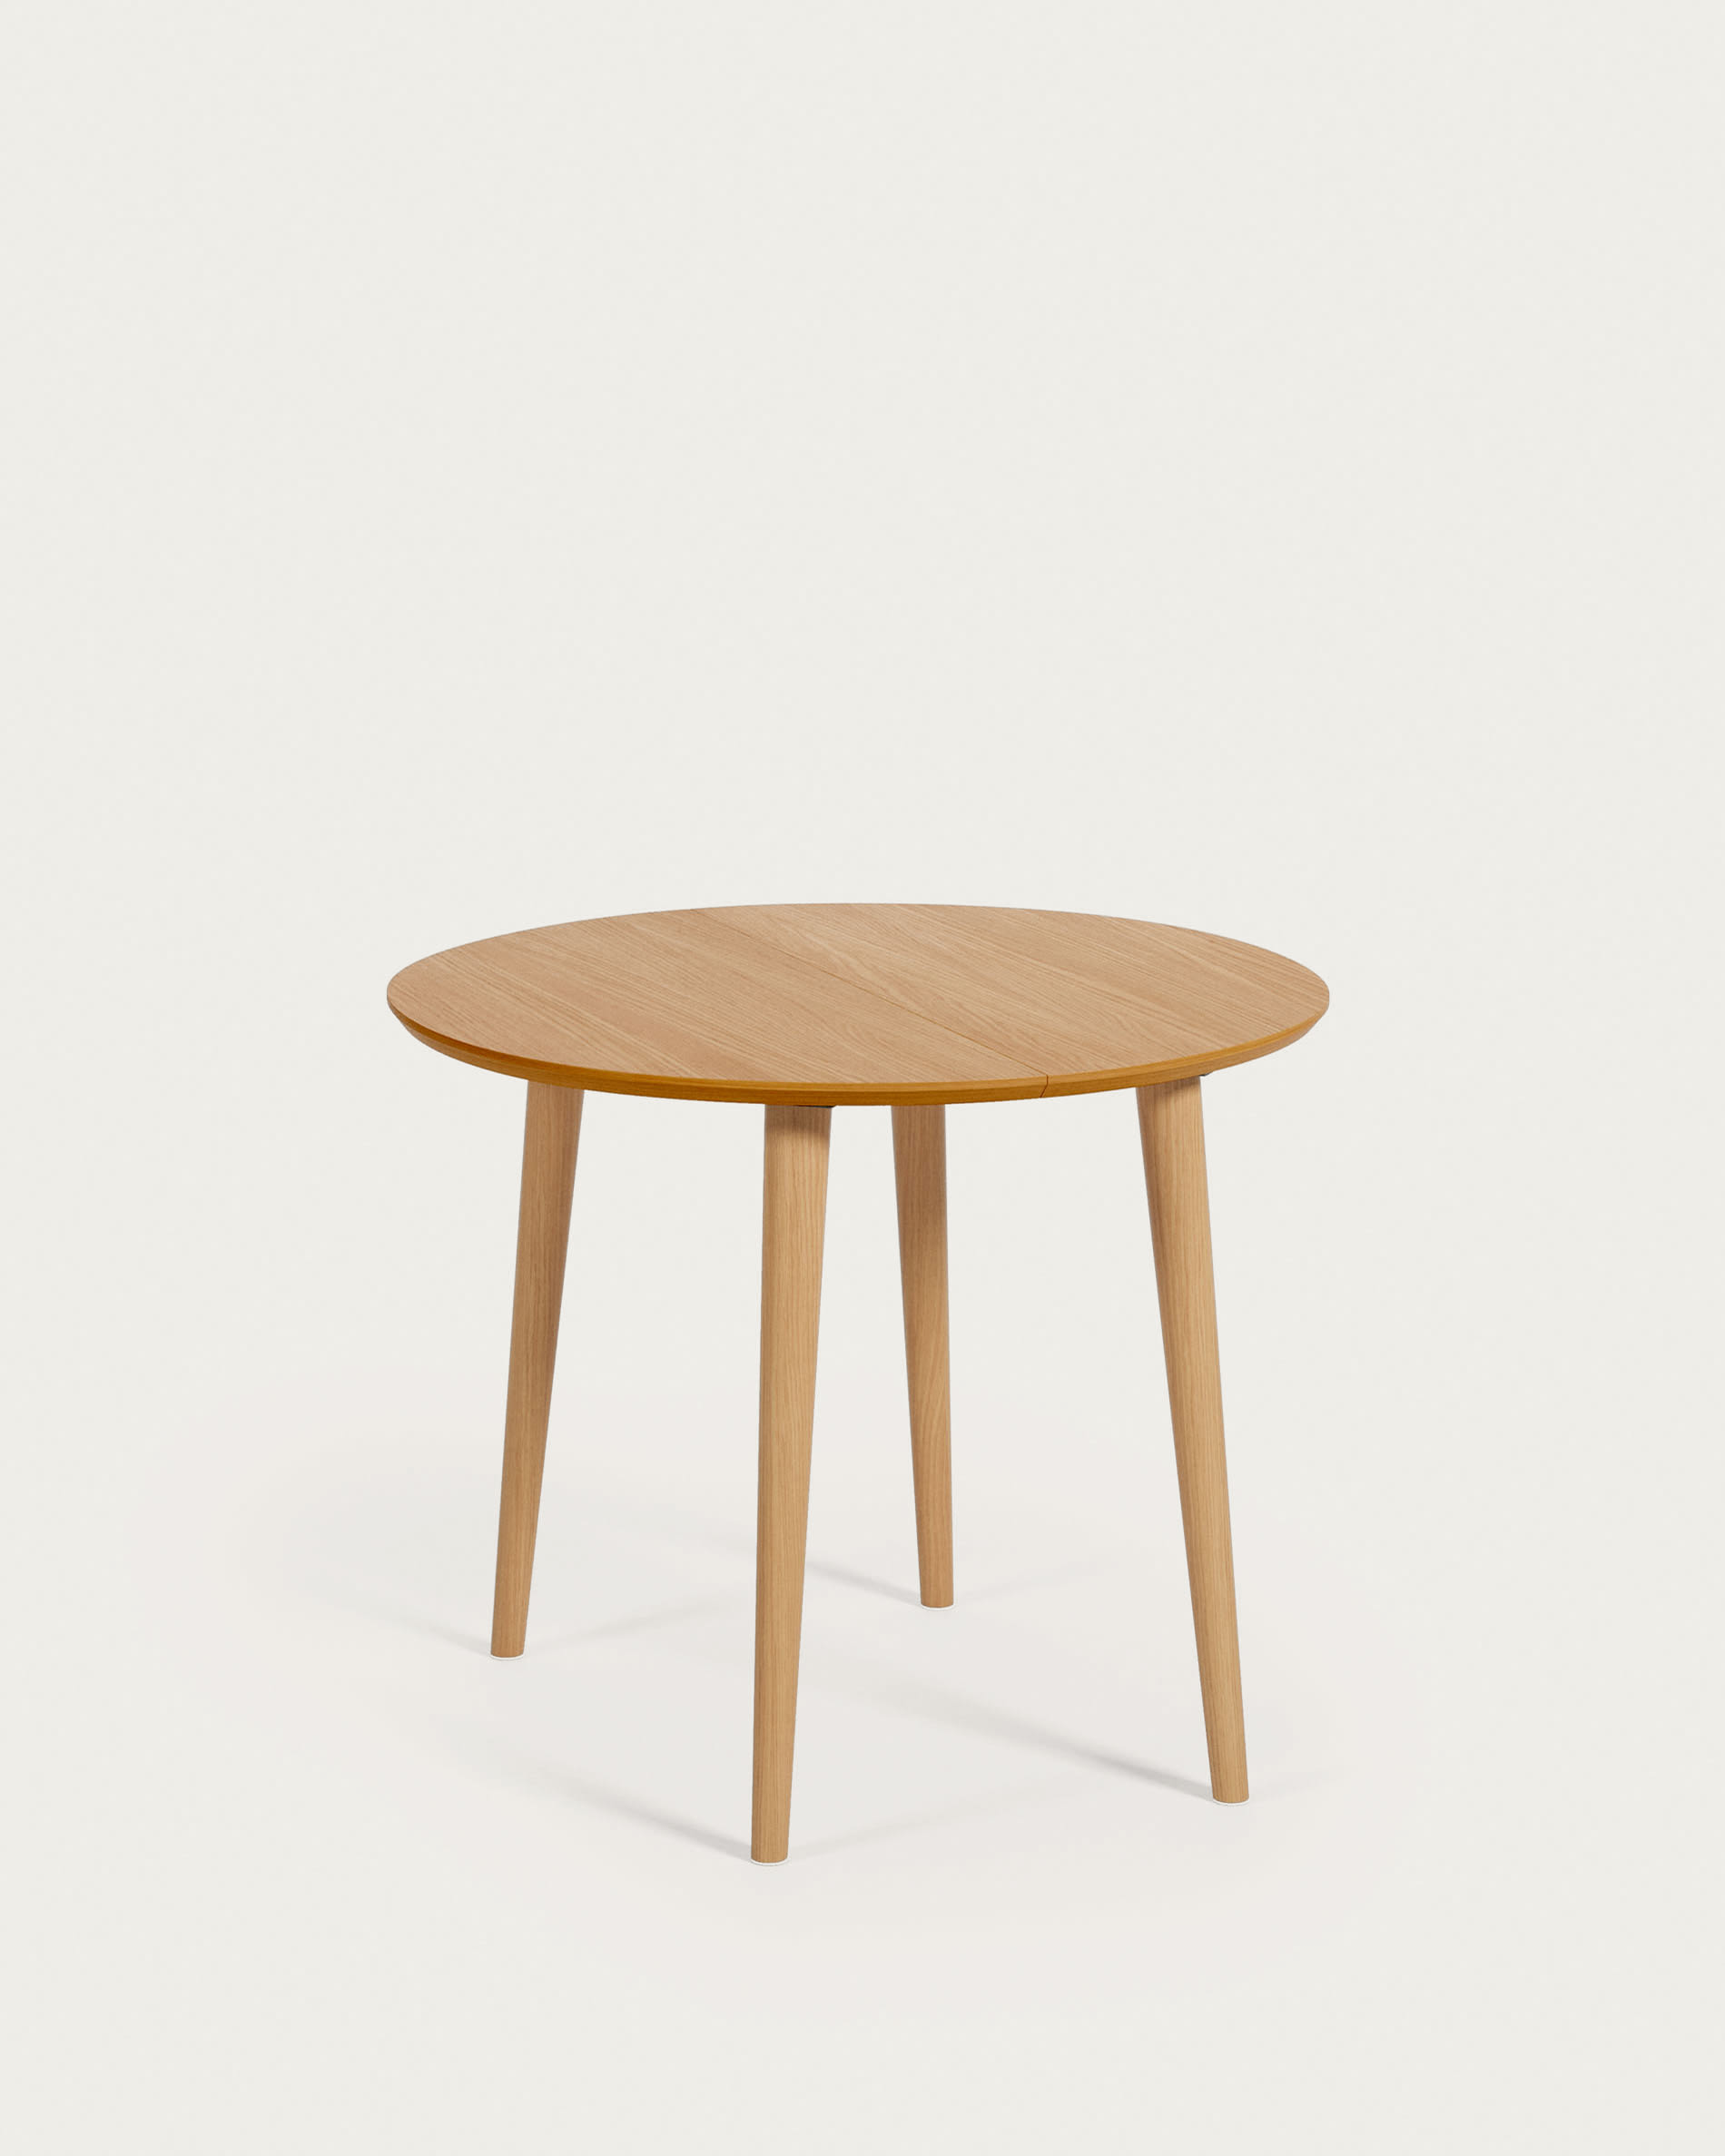 Oqui extendable round table in MDF oak veneer and solid wood legs, 90 (170) x 90 cm